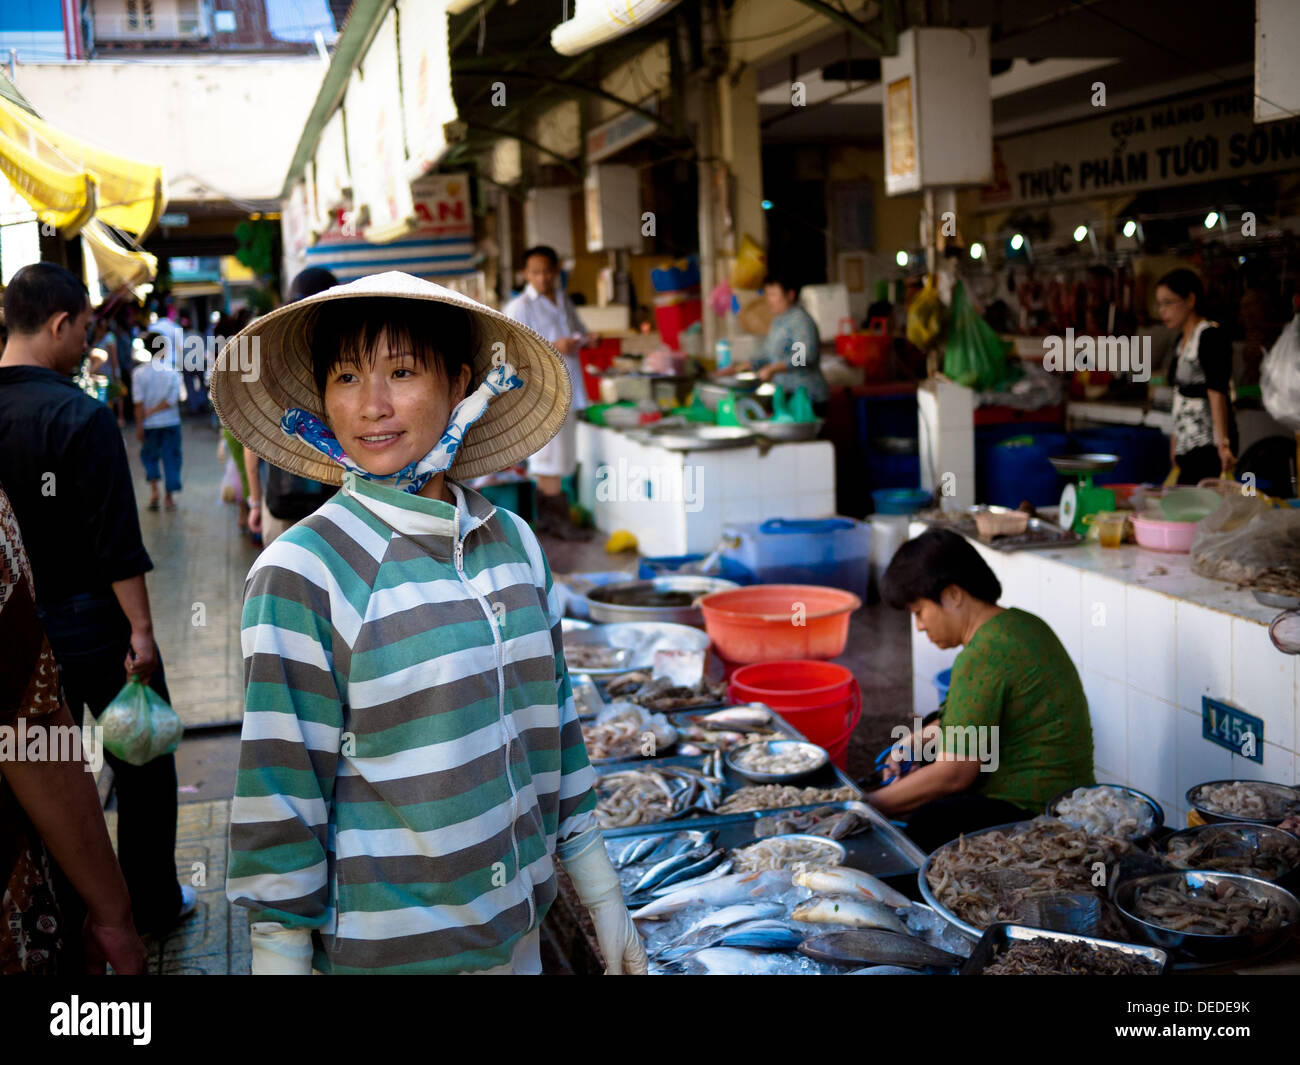 A Vietnamese woman in a conical hat at a street market in Ho Chi Minh City (Saigon), Vietnam. Stock Photo